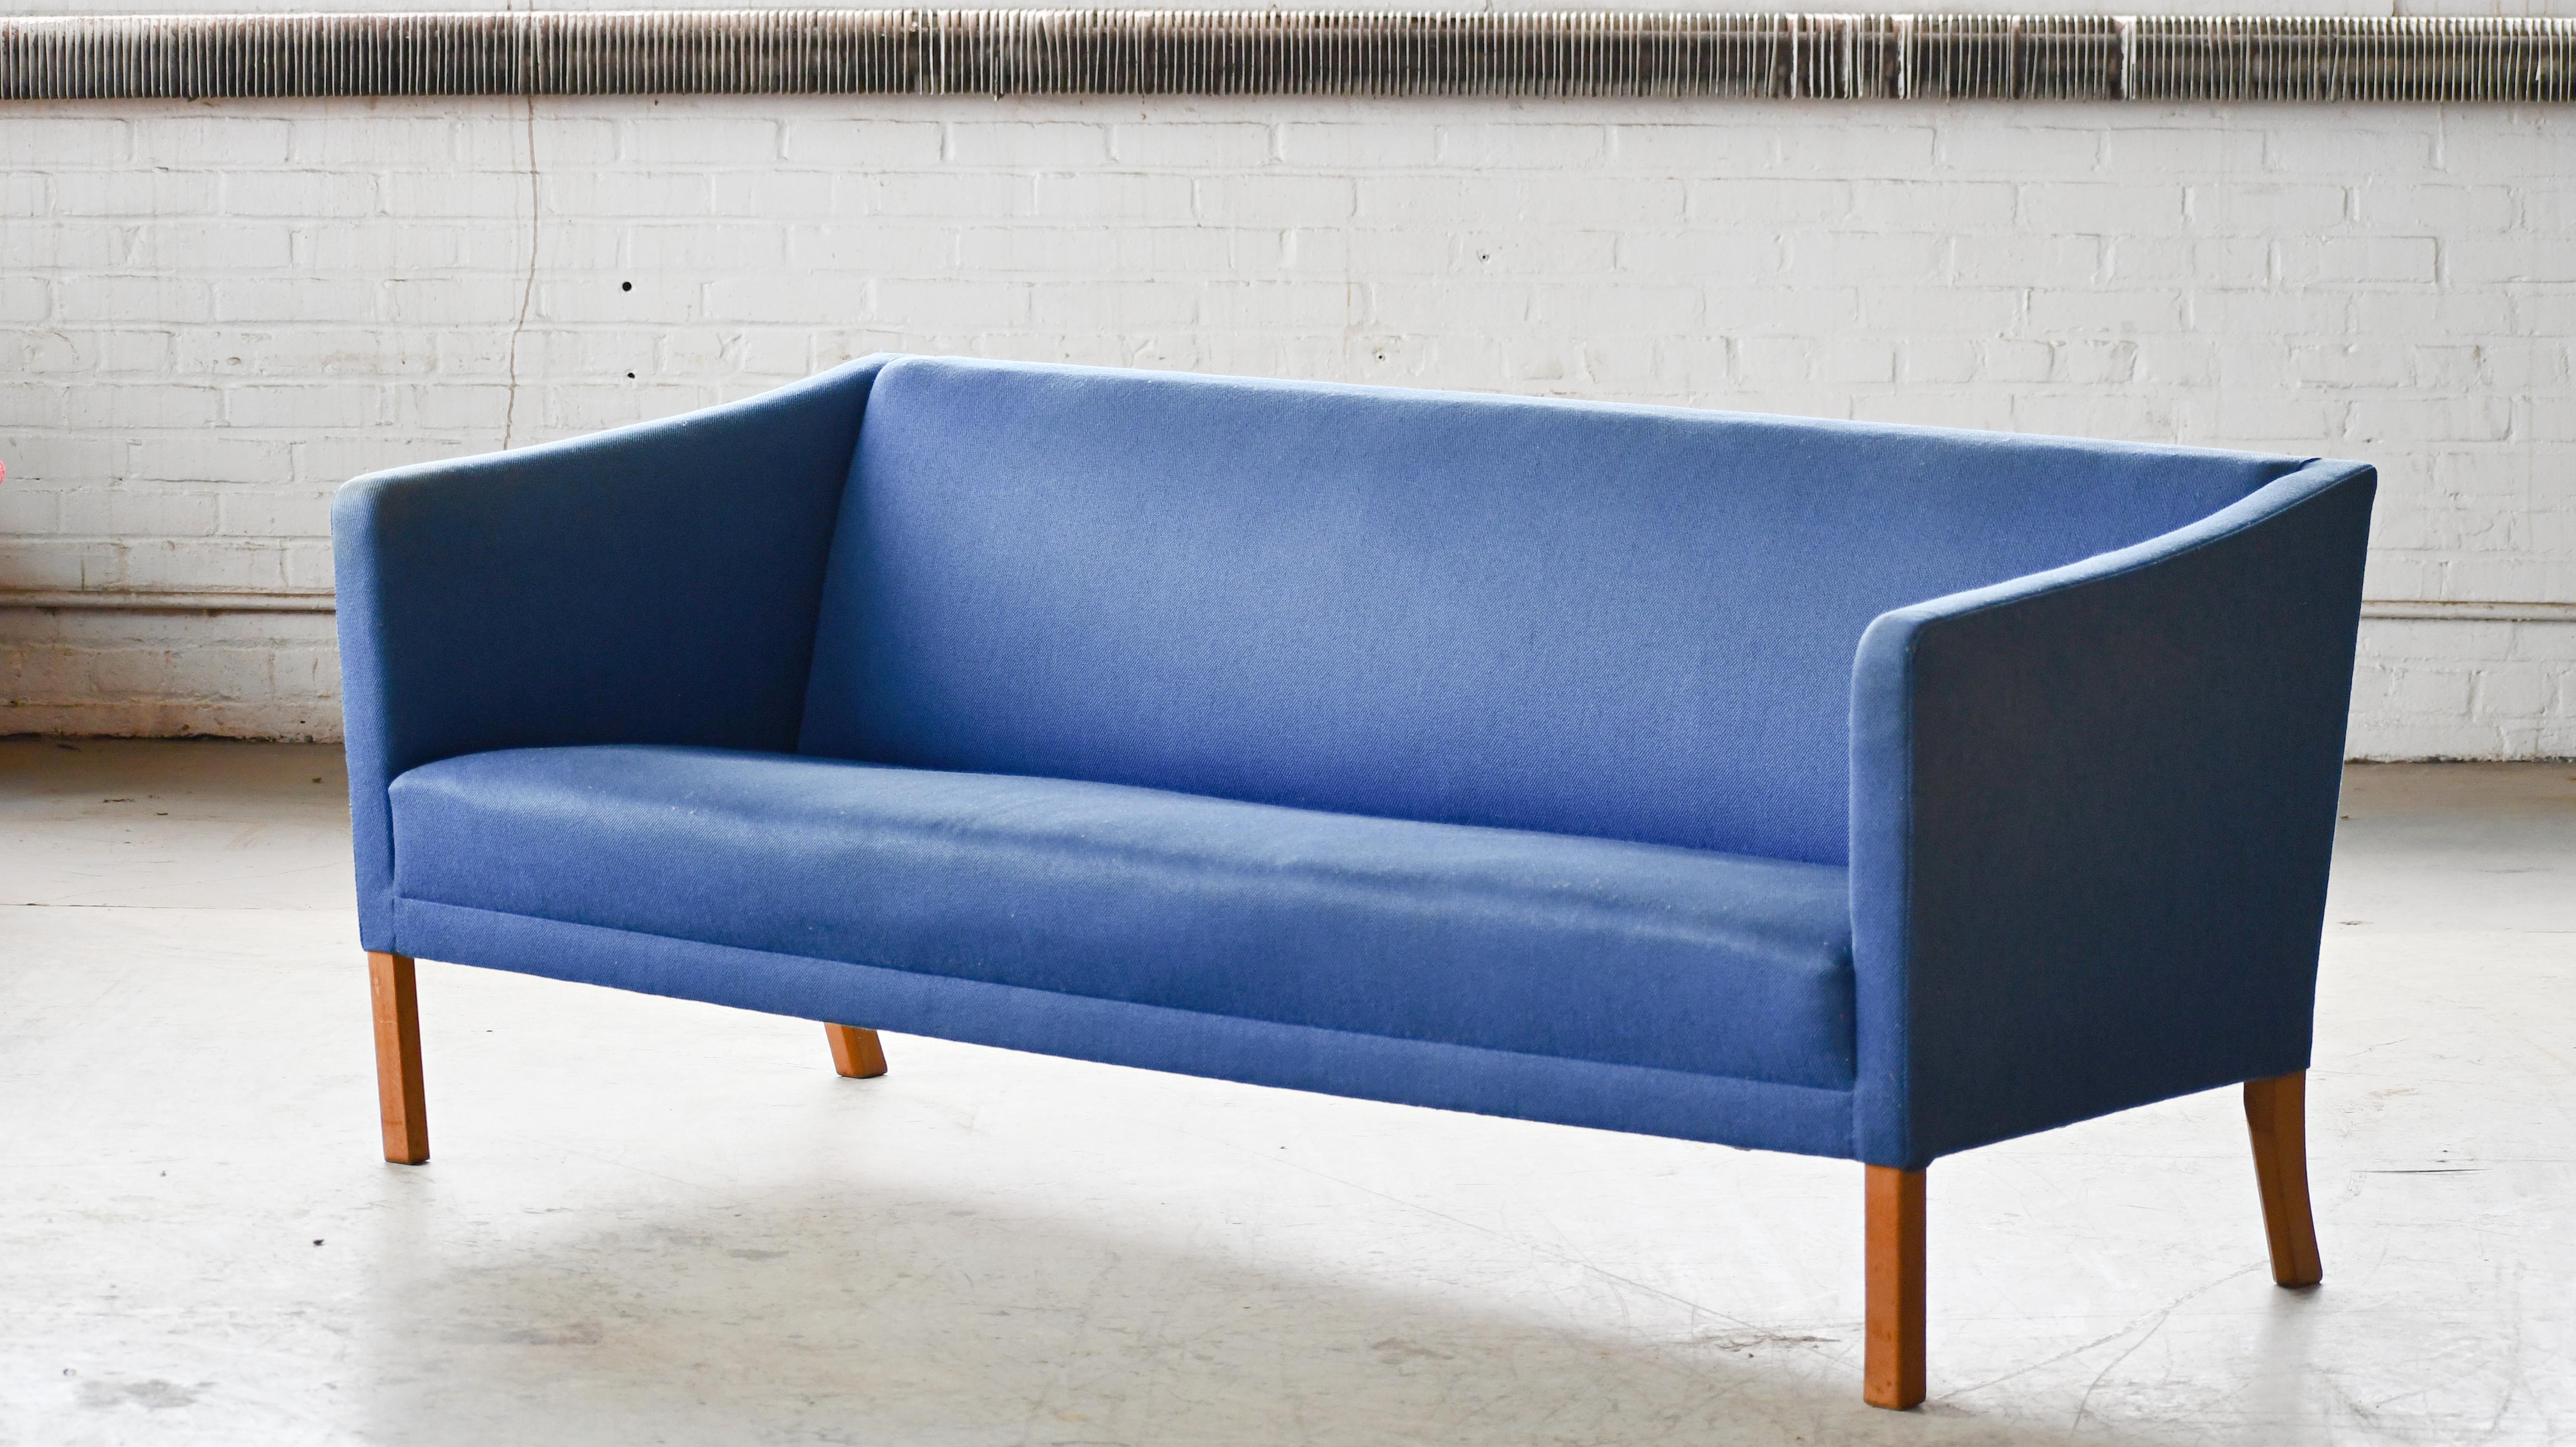 Beautiful Classic Danish design very similar by Grete Jalk's Model JH180 design for Johannes Hansen. The design is from the 1950's but this sofa appears to have been made in the 1970's sometime. Simple yet very elegant and refined design beautiful